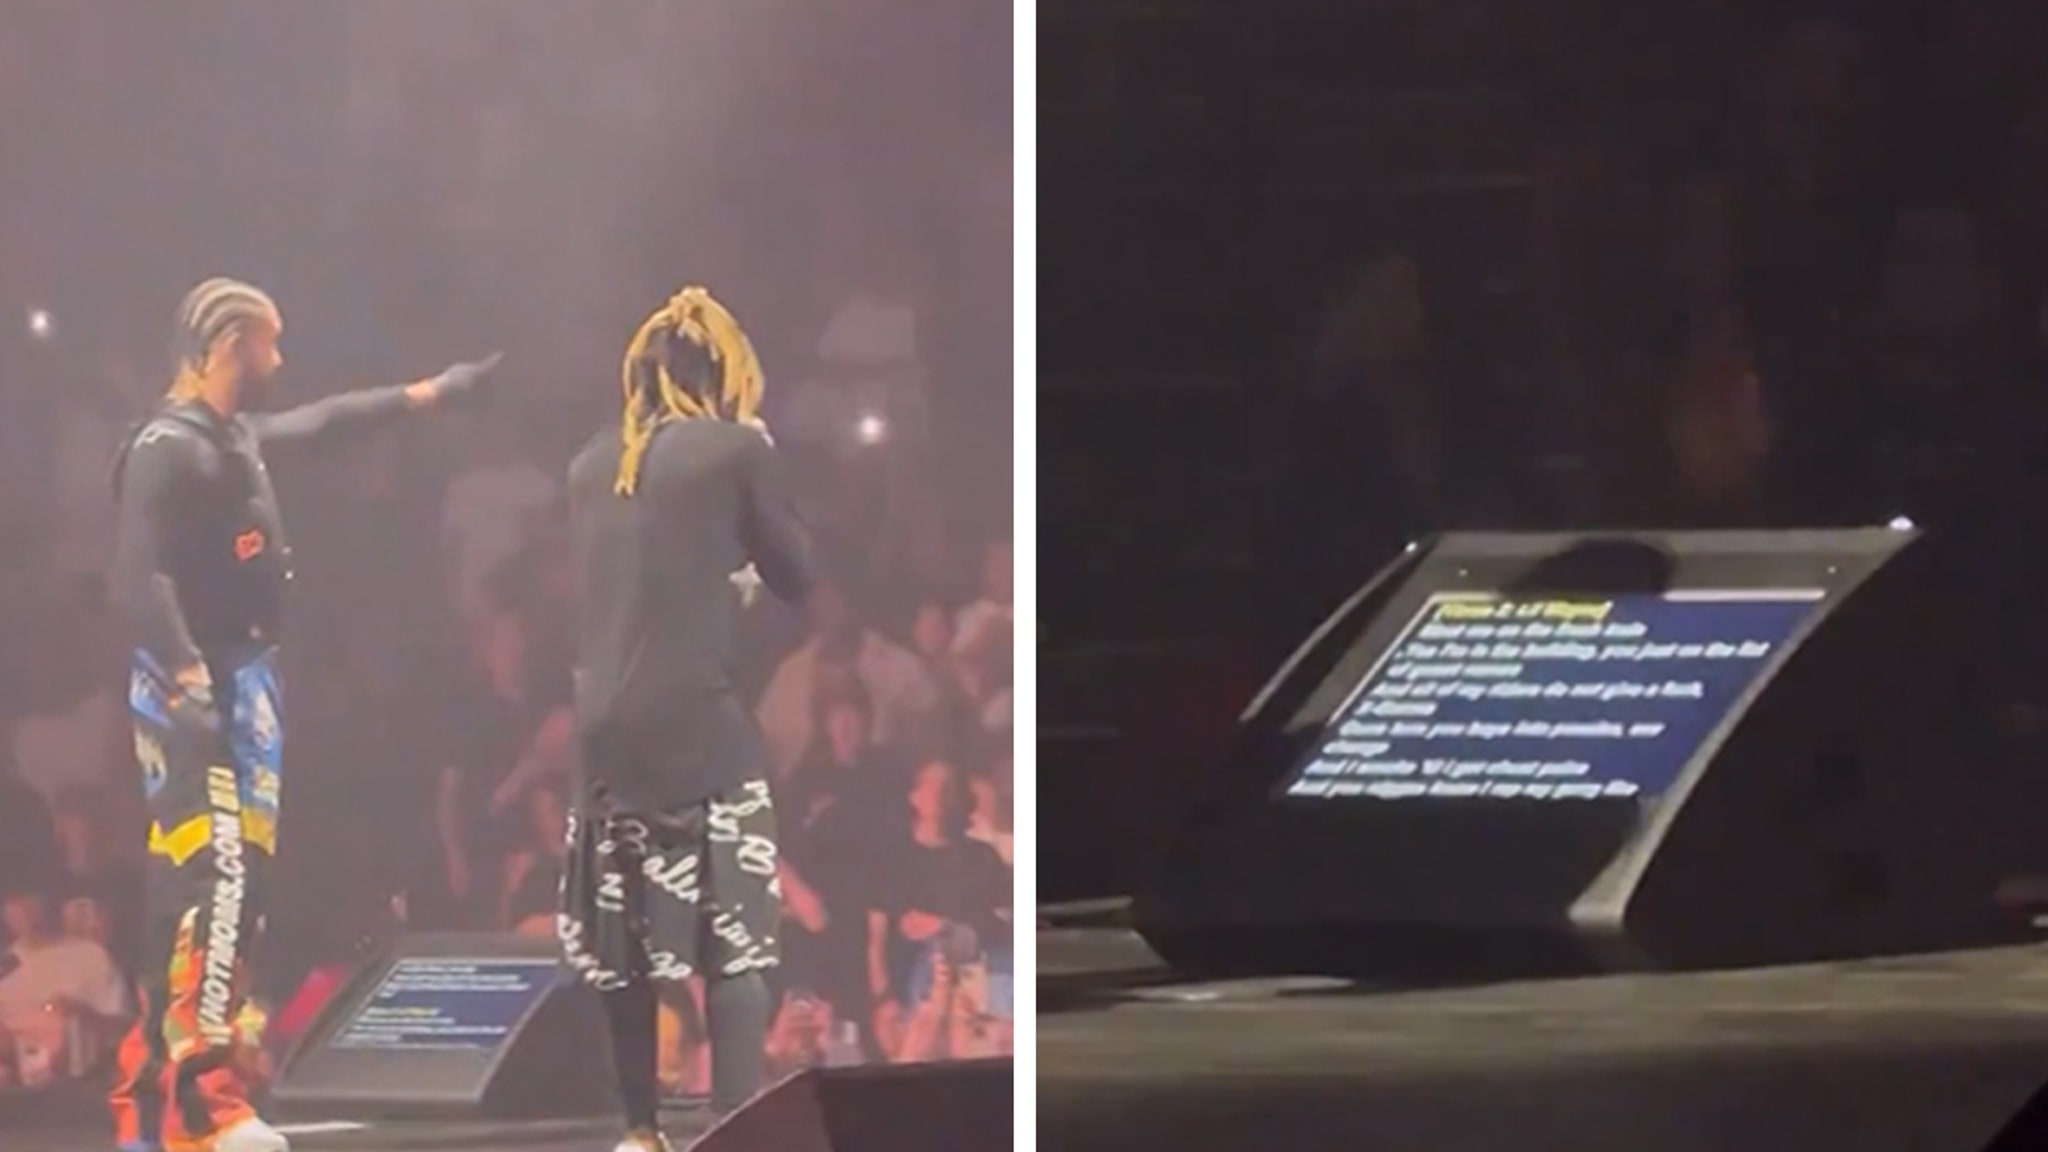 Drake and Lil Wayne Spotted Rapping Lyrics From Teleprompter On 'Blur' Tour #LilWayne